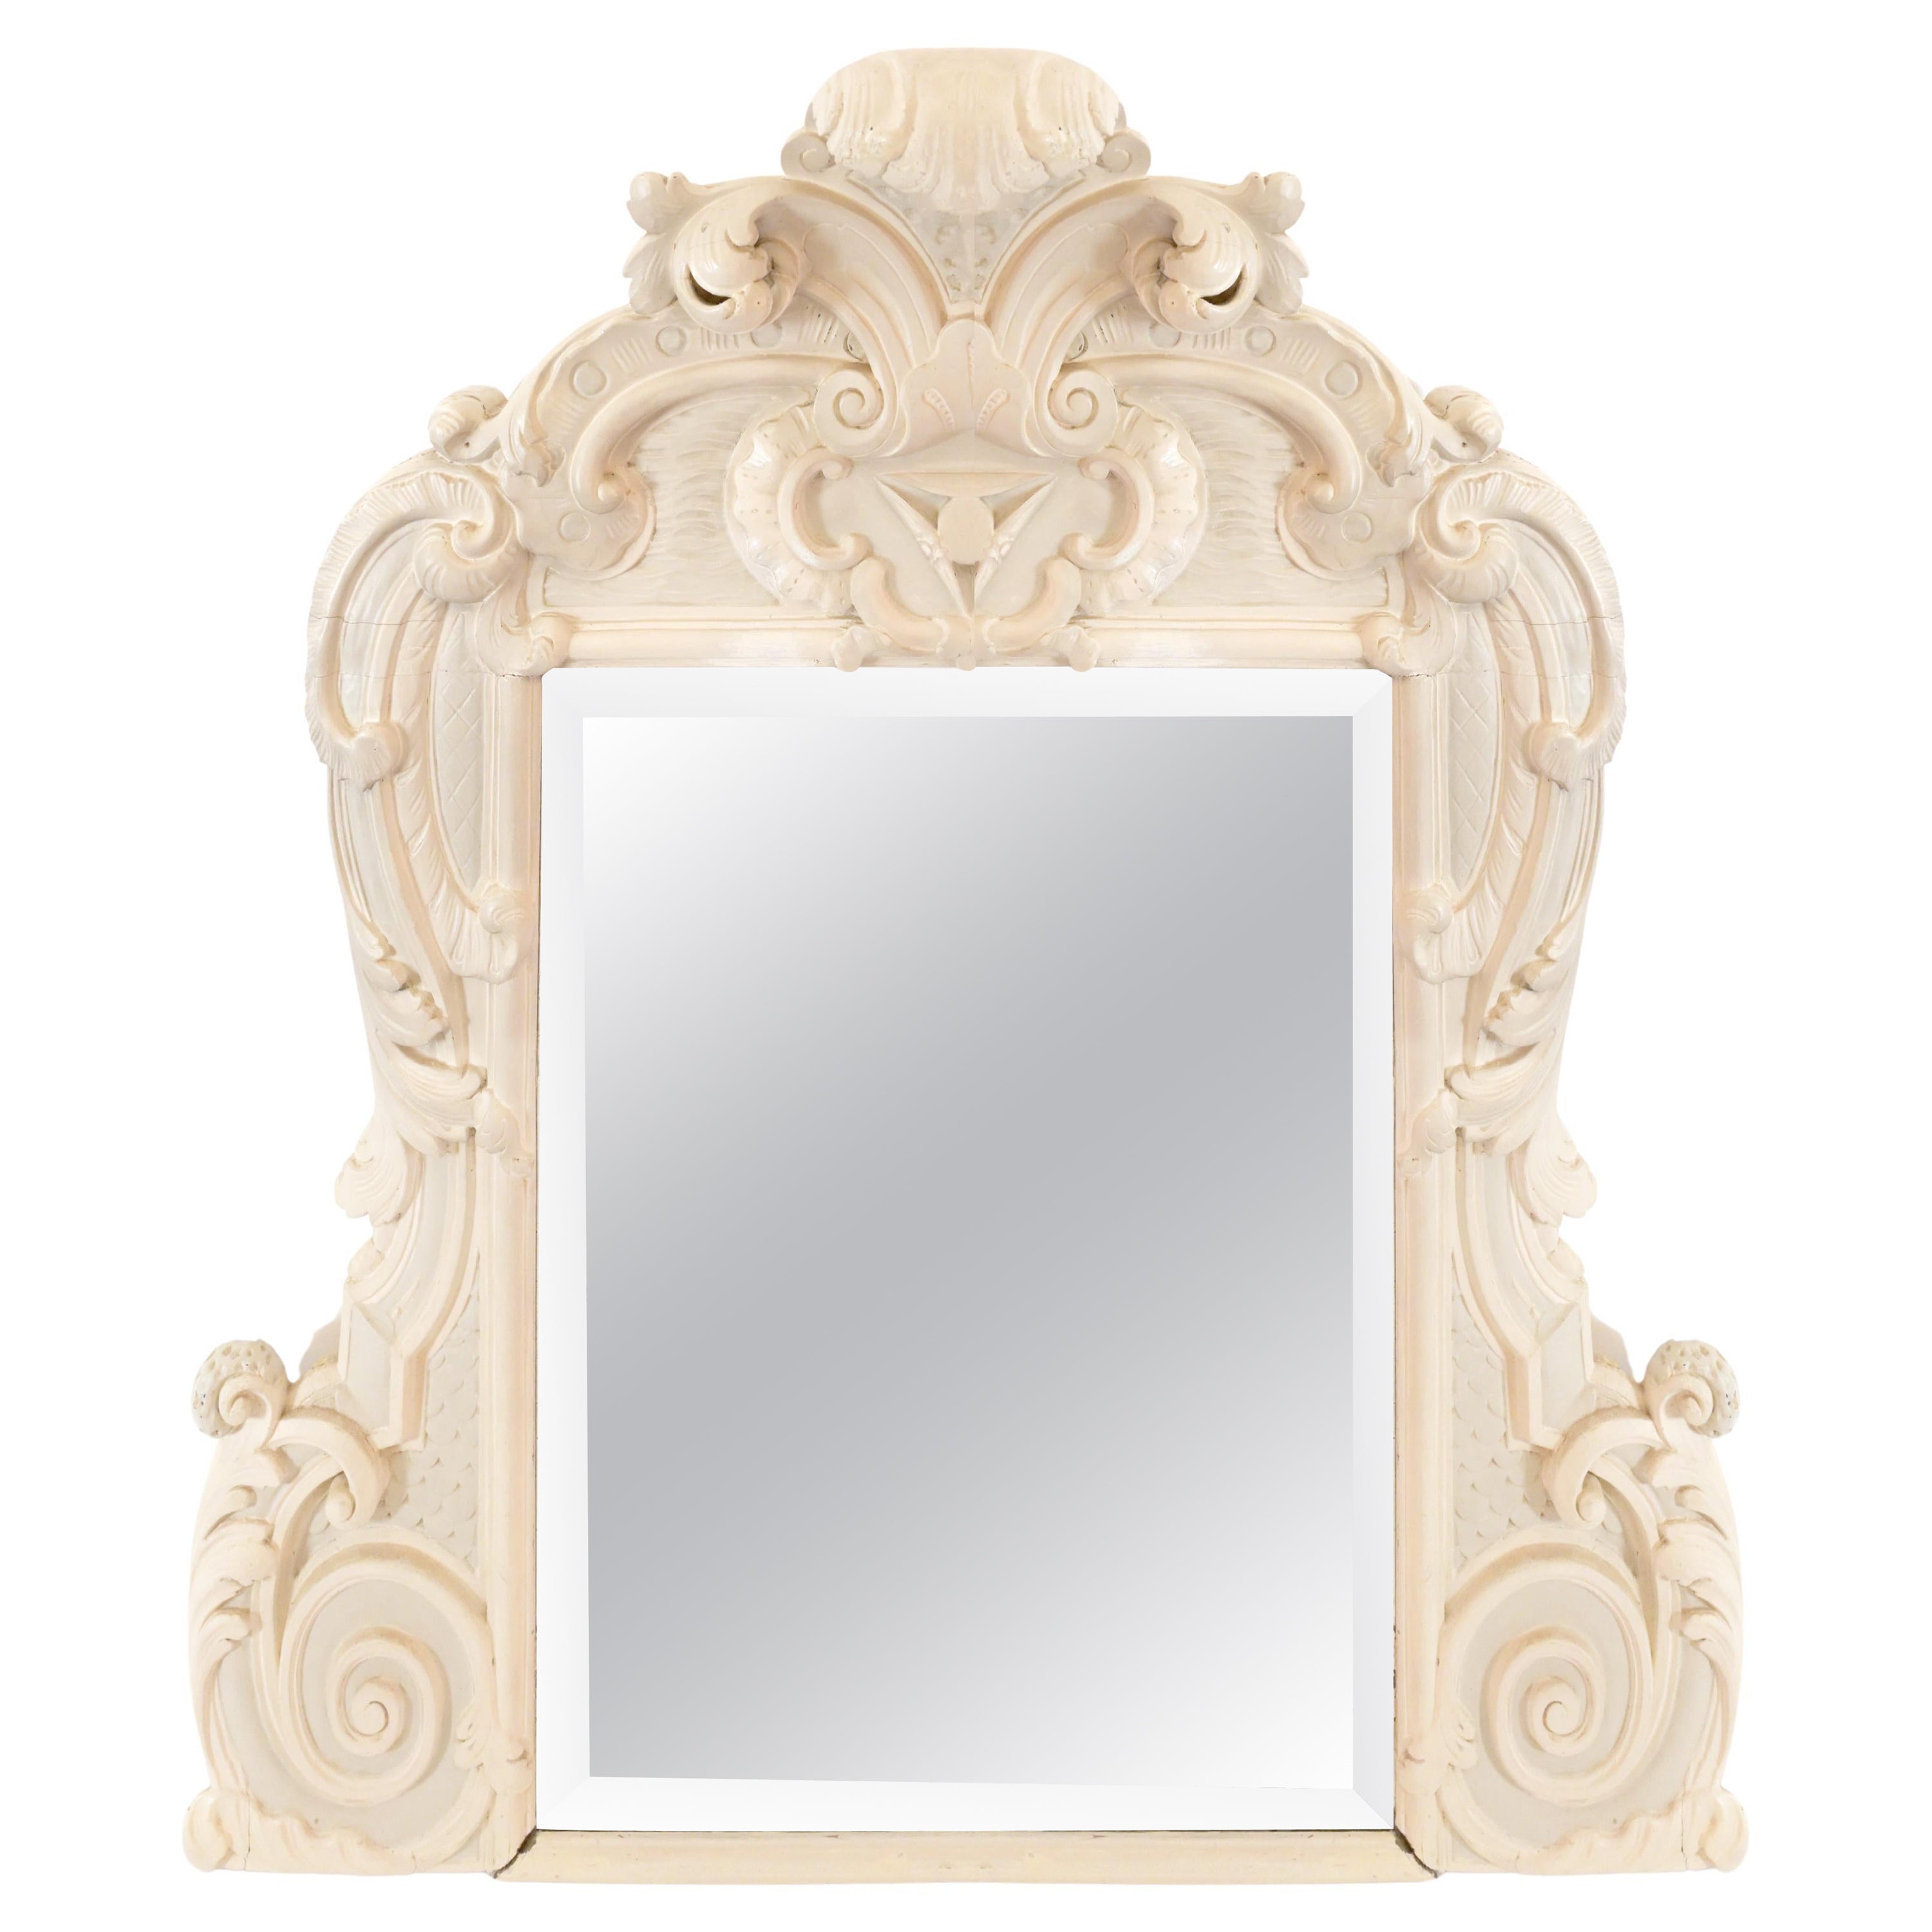 What is a scallop mirror?